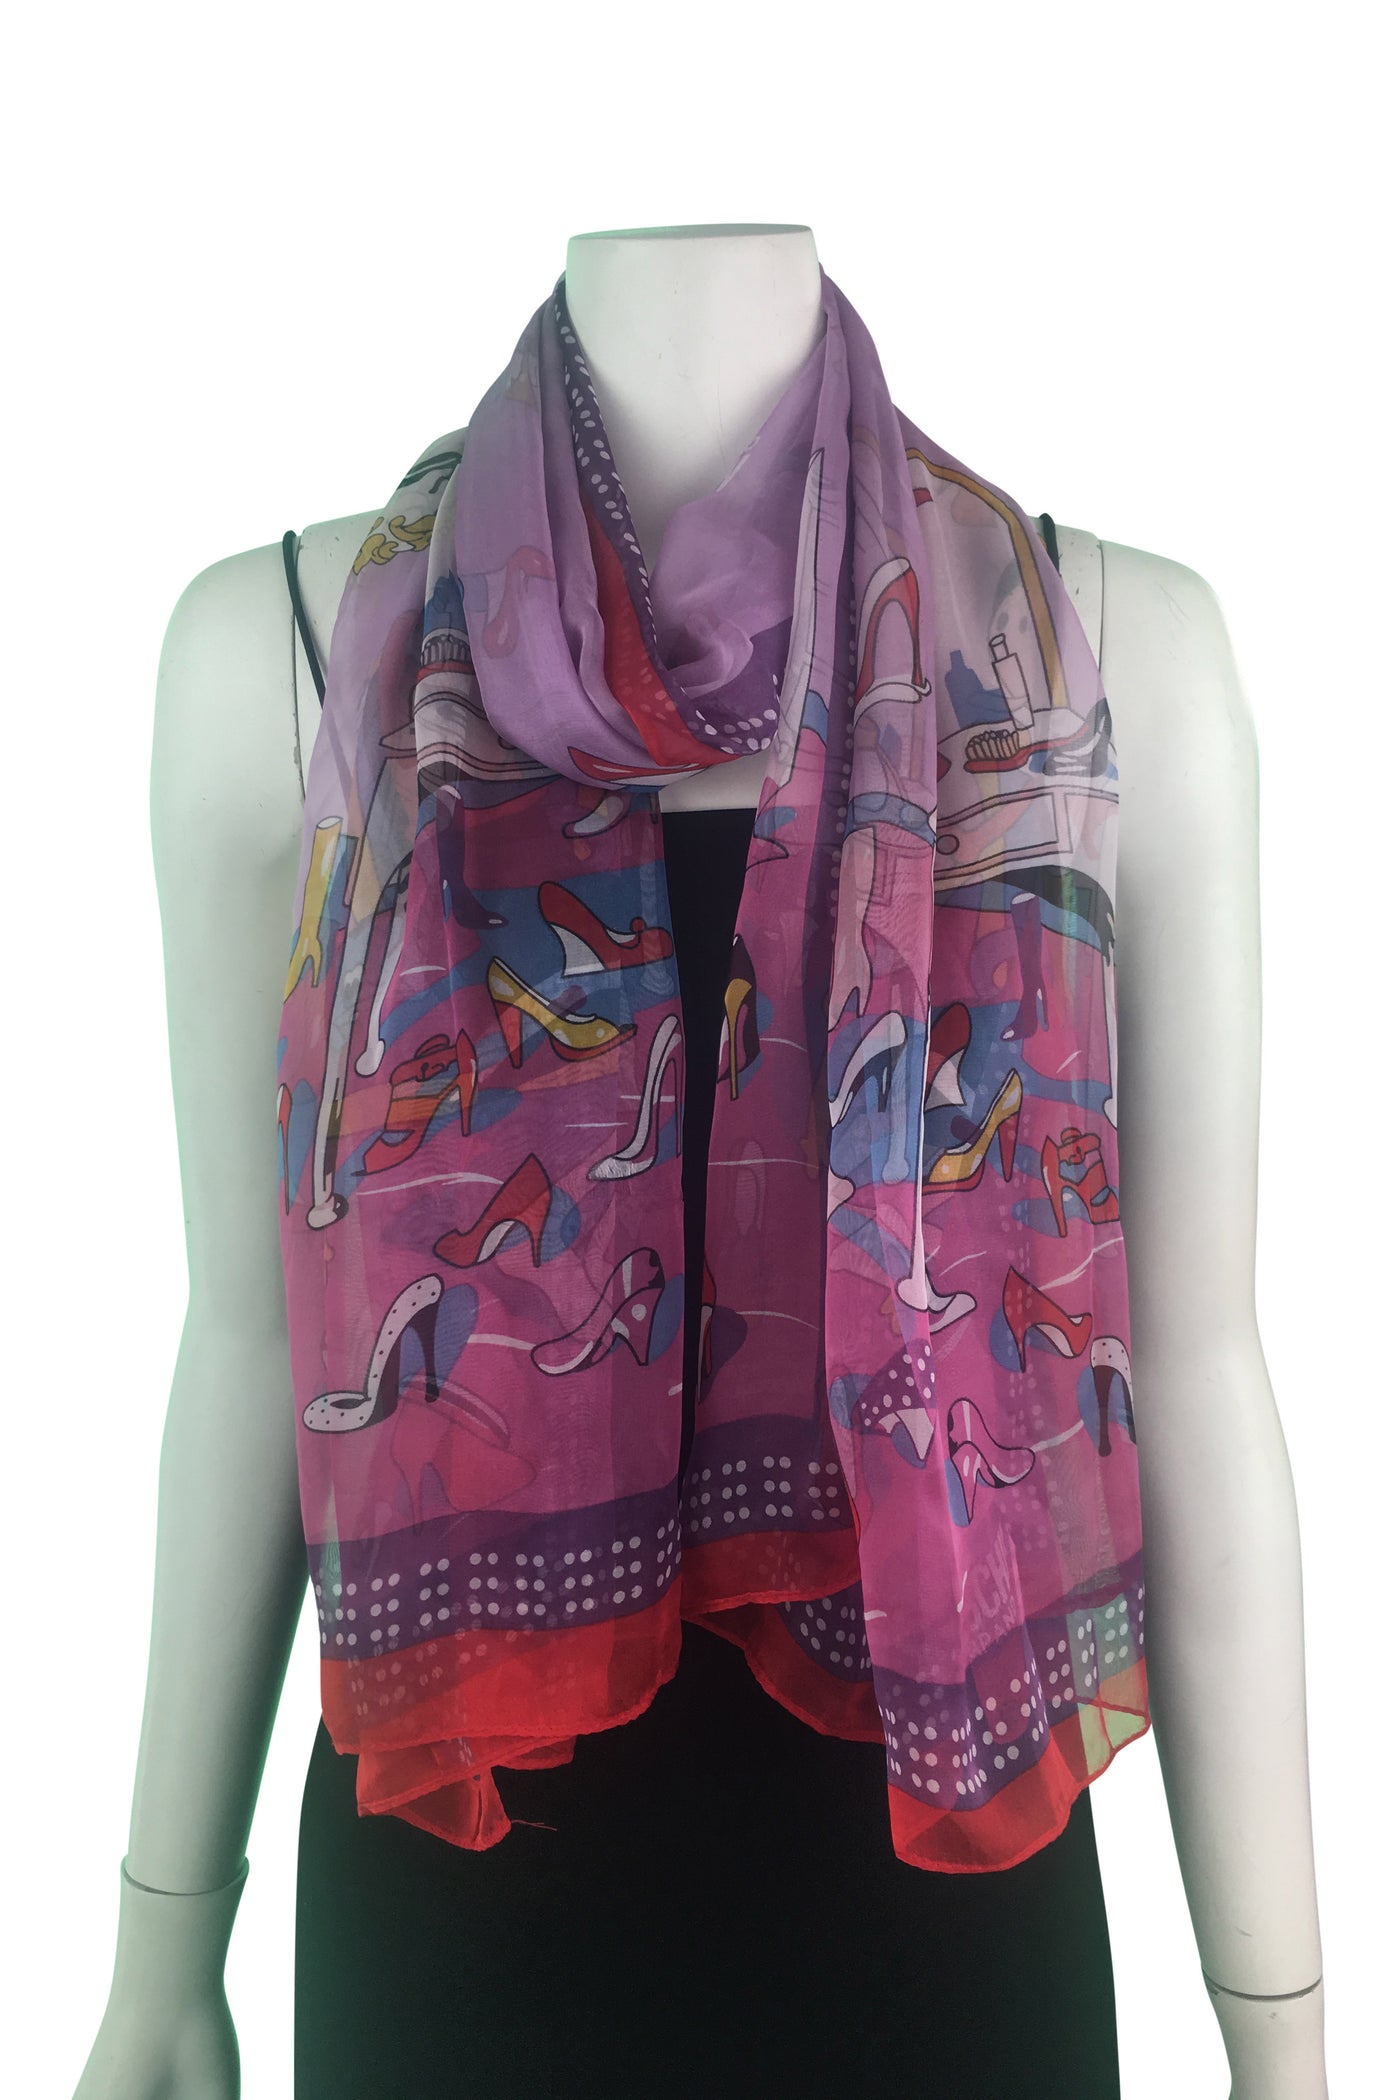 Cheap and Chic, Betty Boop Scarf